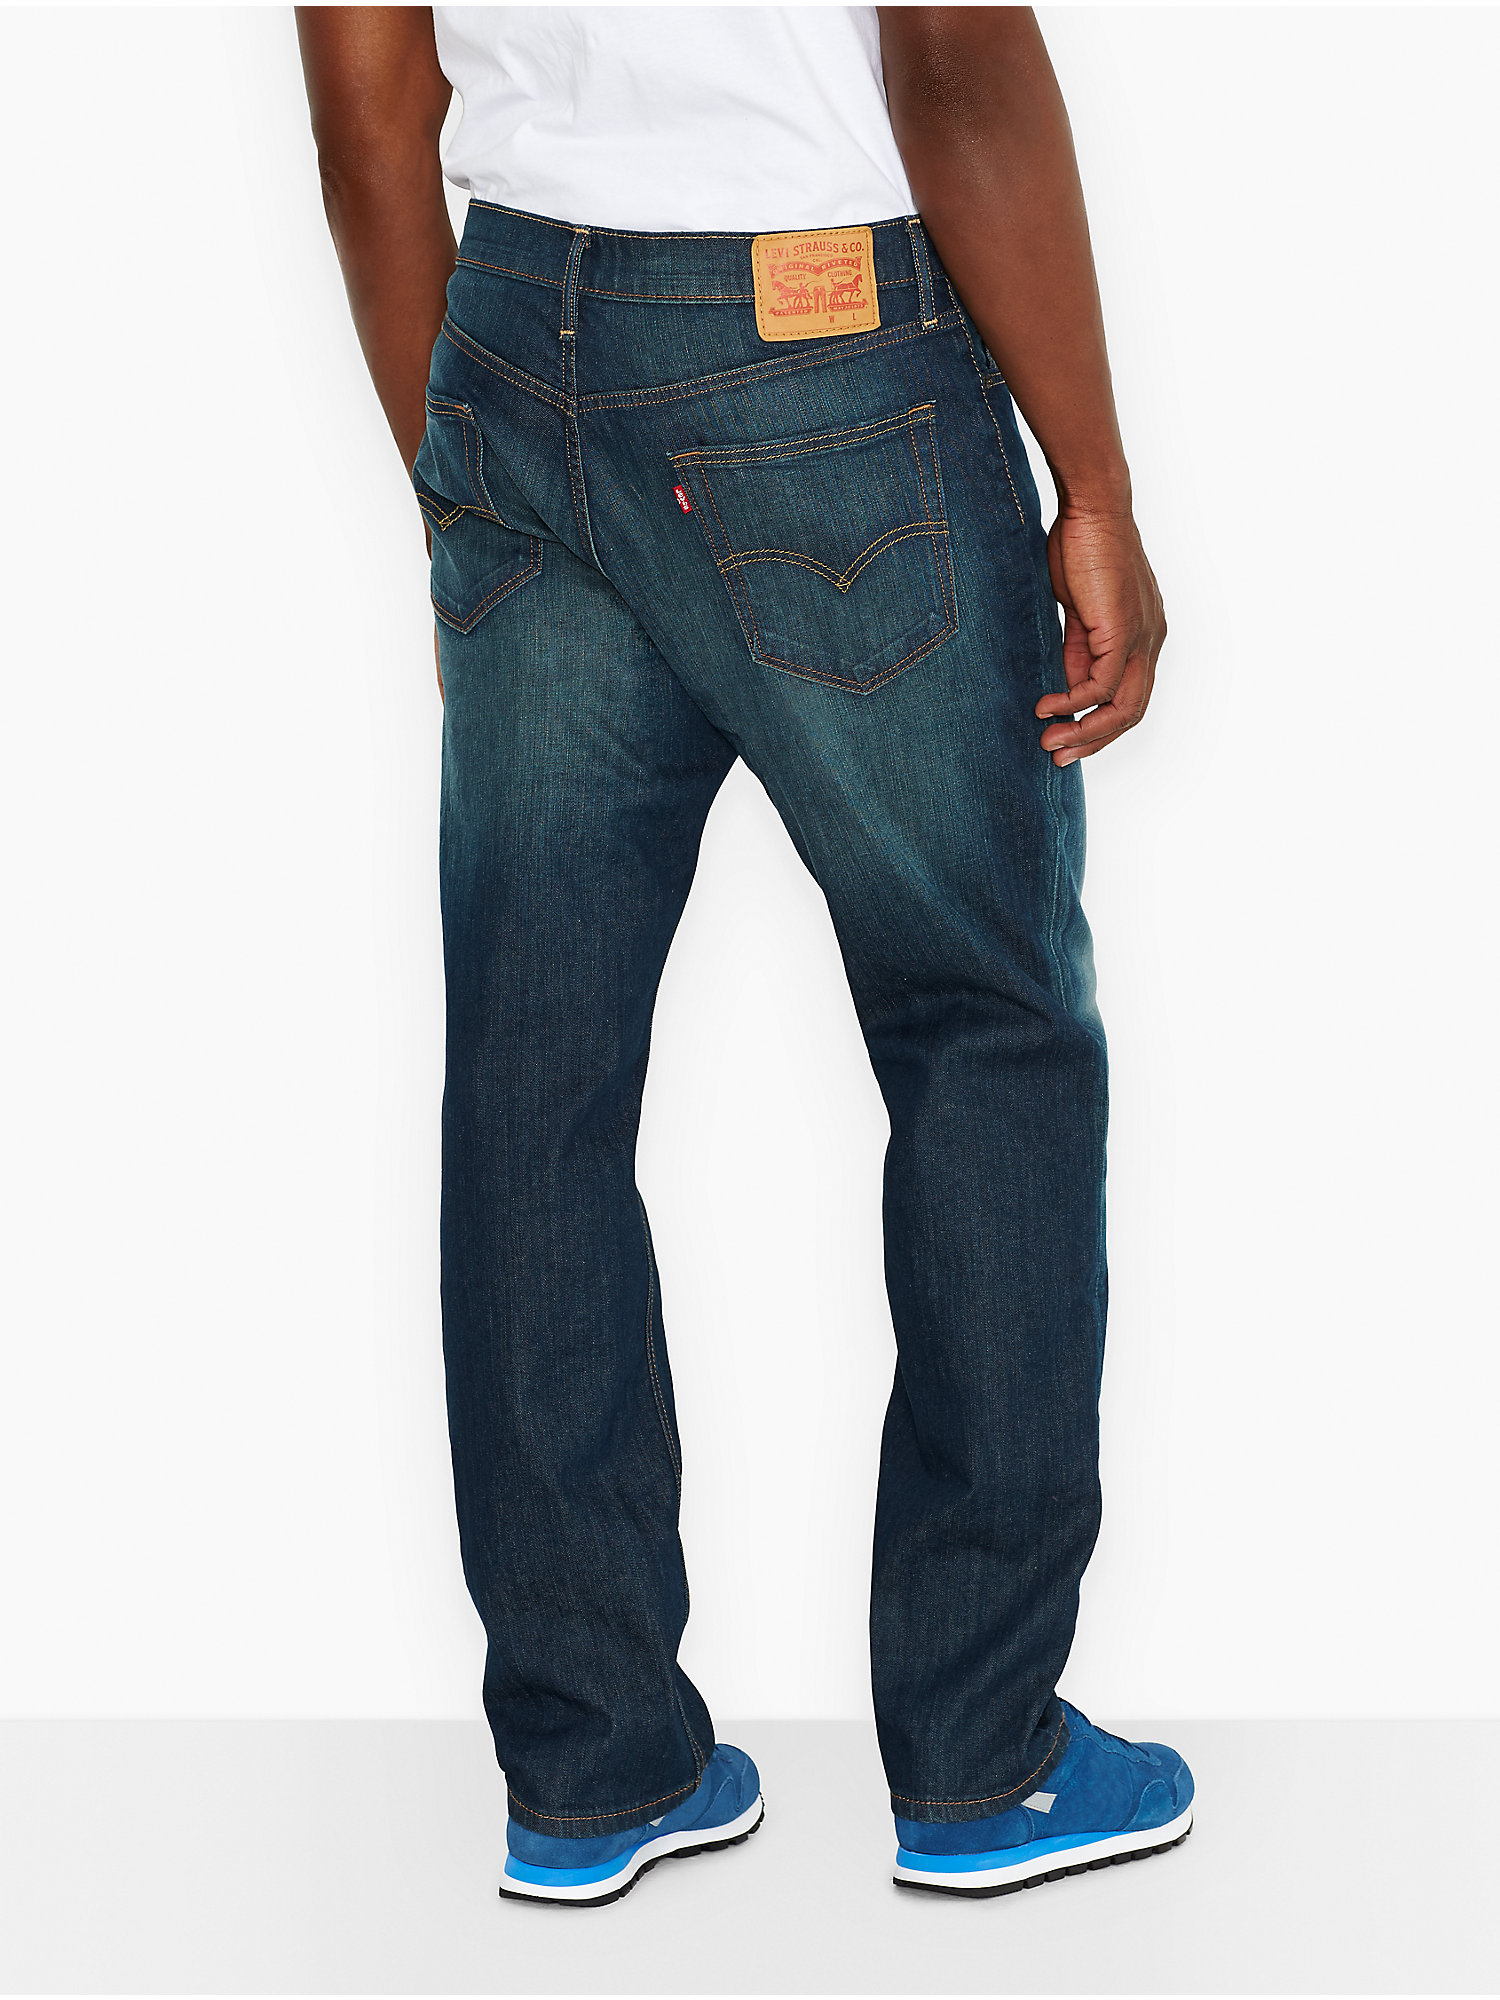 Levi's Men's Big & Tall 541 Athletic Fit Taper Jeans - image 3 of 7